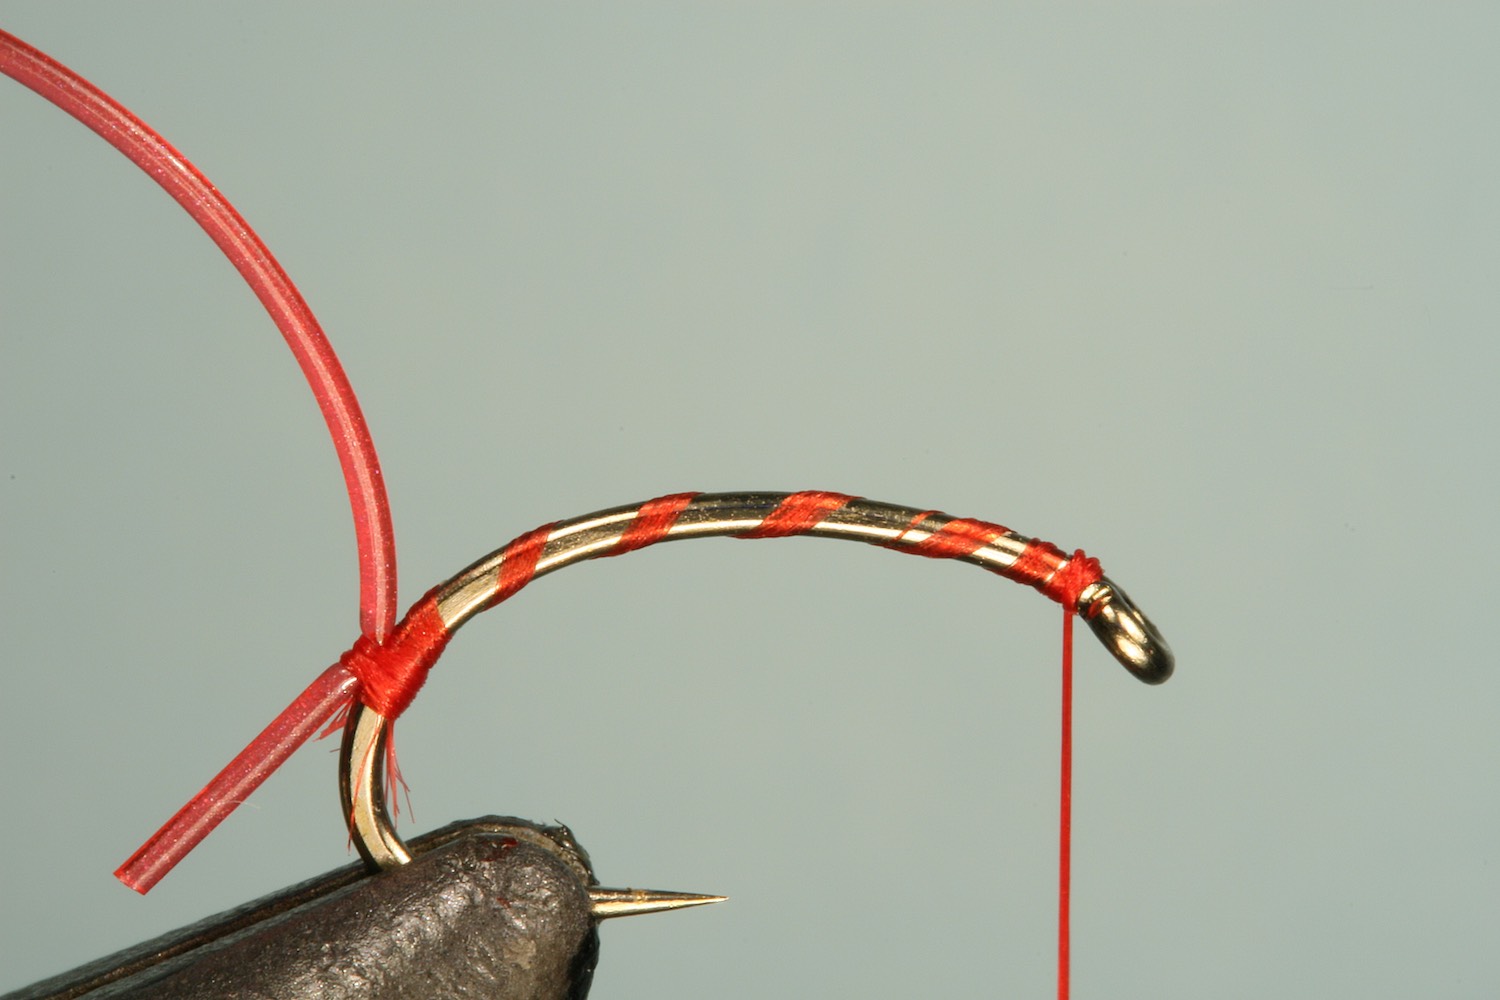 Step 1 of tying sequence for jelly bloodworm fly pattern